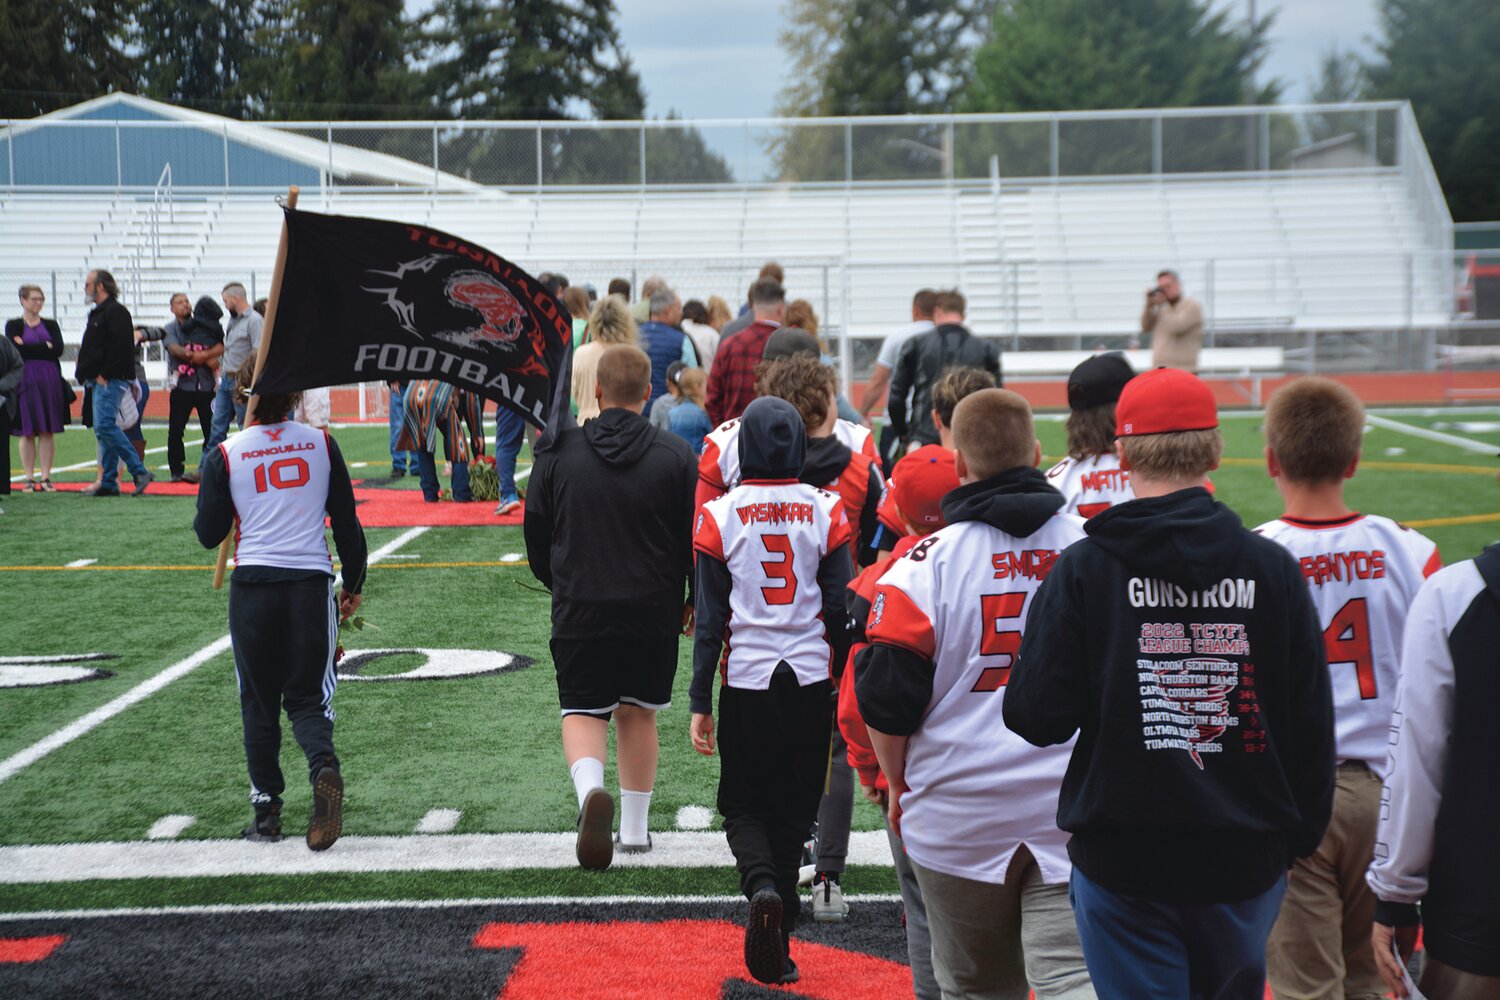 Members of Shawn Jemtegaard’s TCYFL team enter the field to place their roses during a memorial service on May 21.